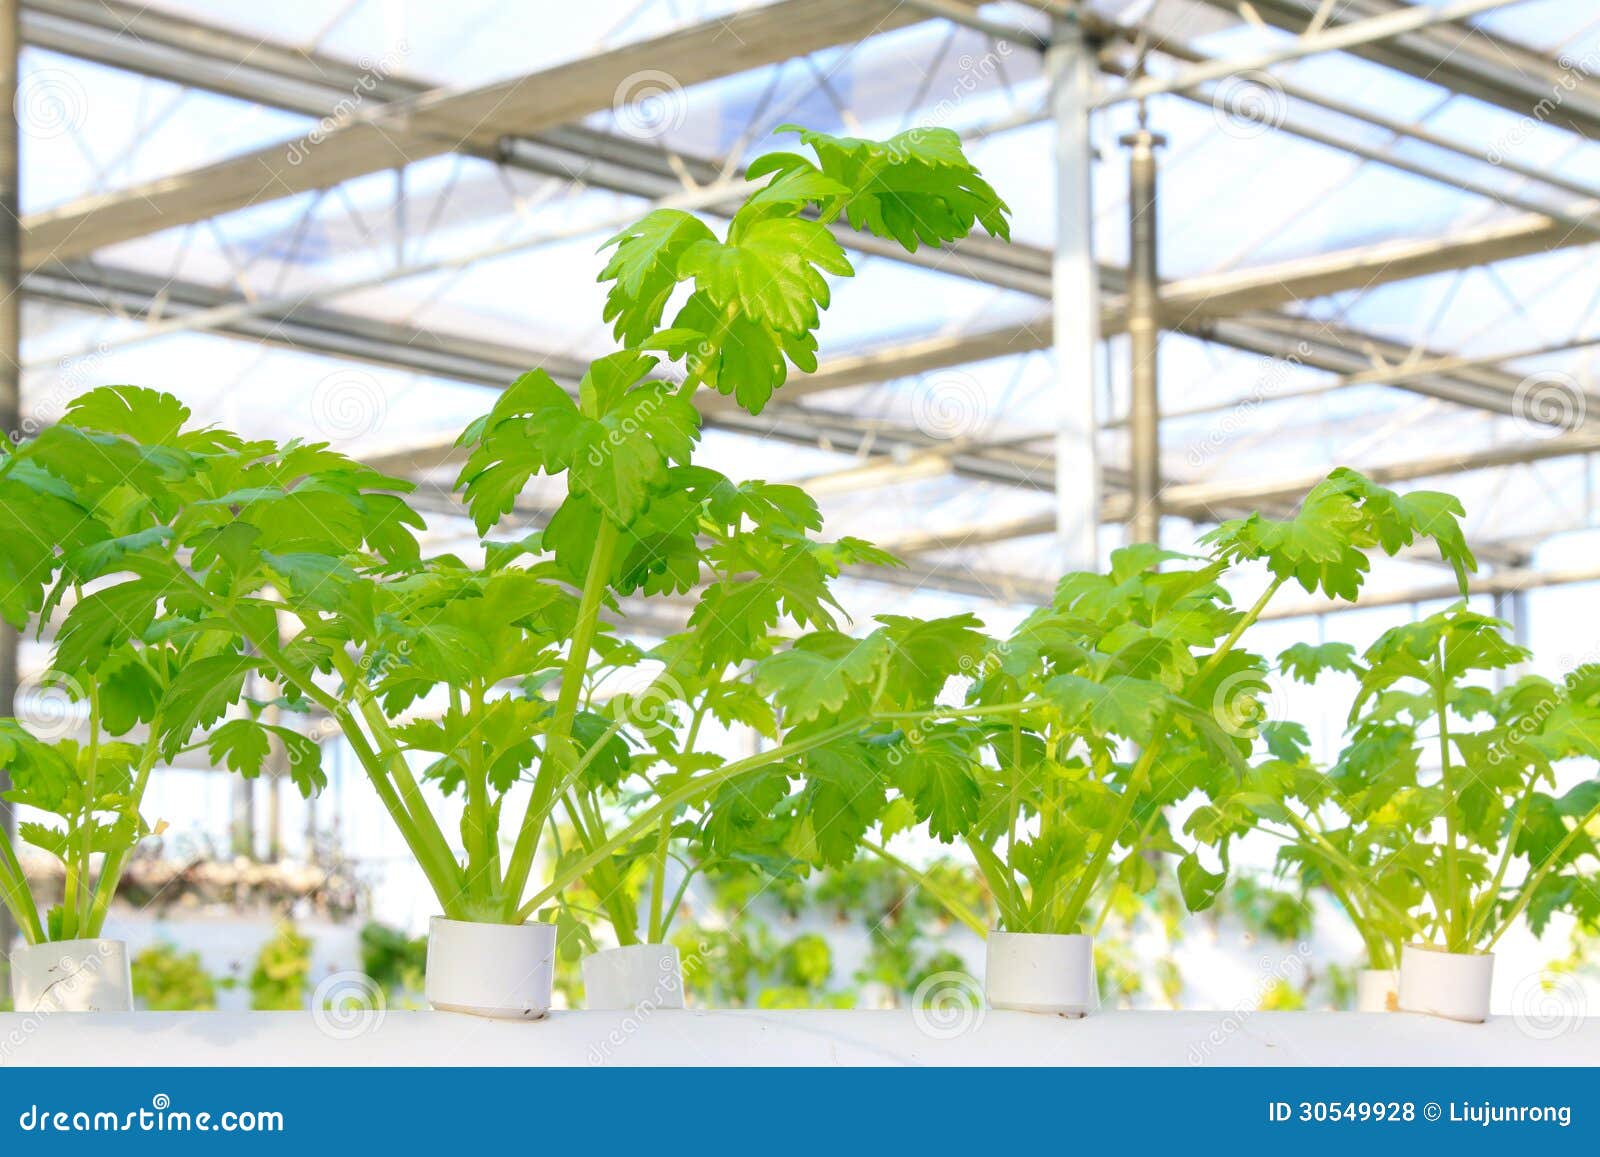 Soilless Cultivation Of Celery In A Botanical Garden Stock Photo